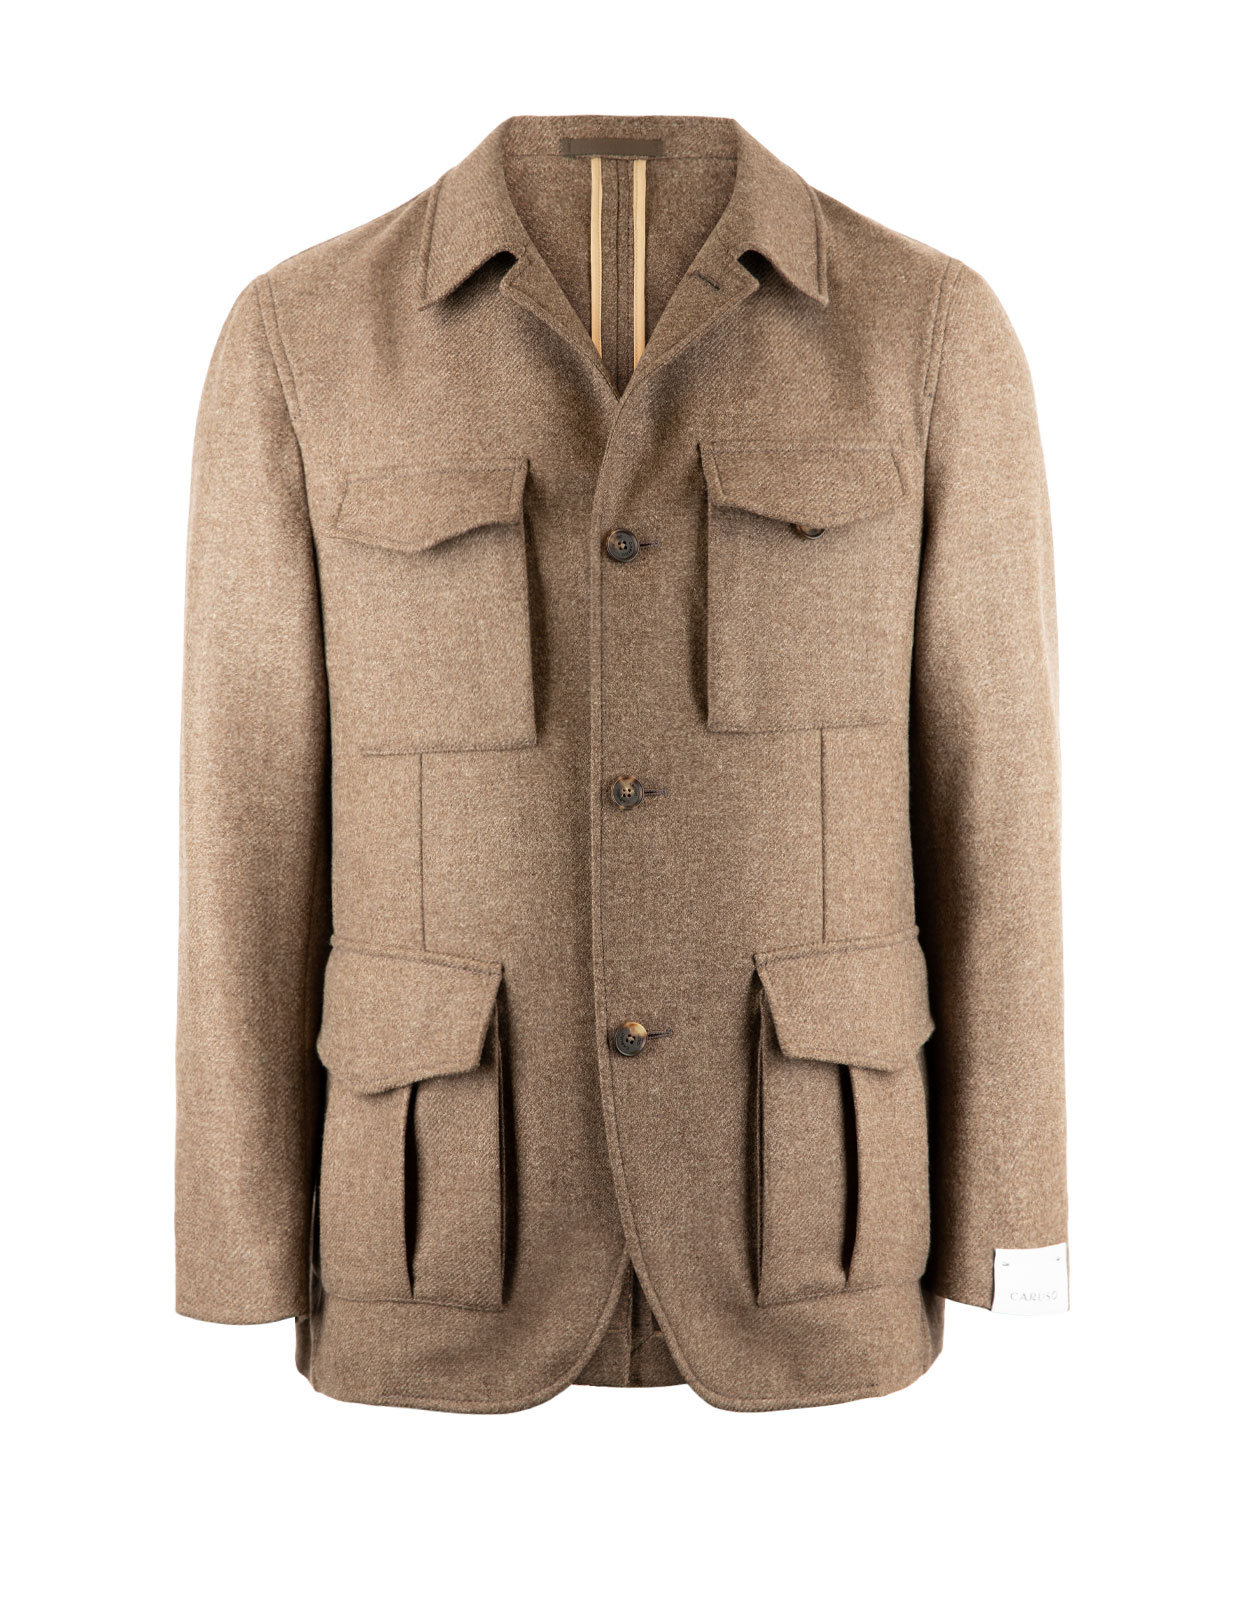 Country Jacket Light Beige